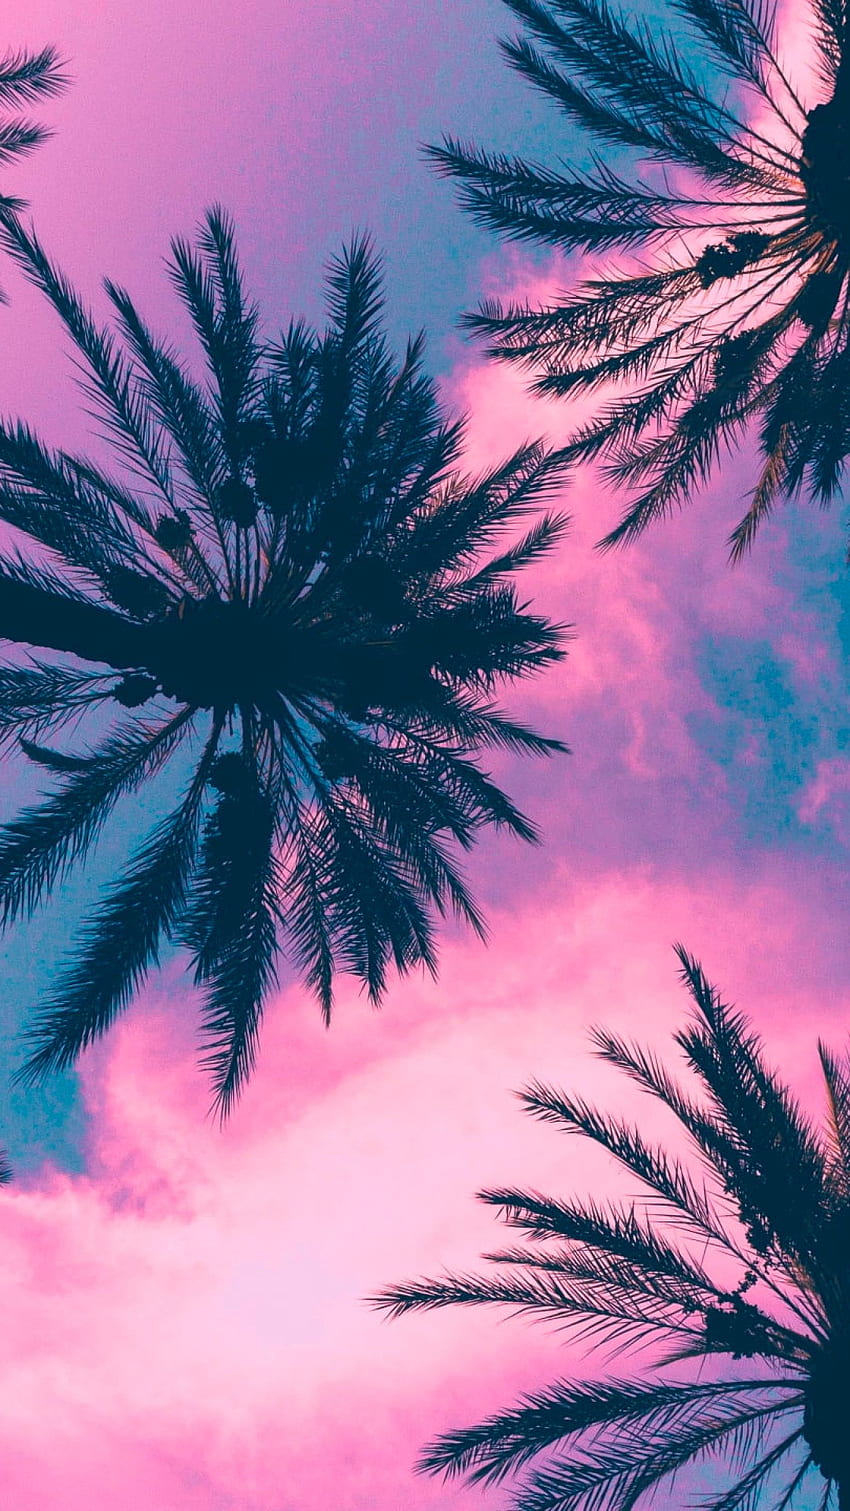 Nature • Coconut plant, palm trees, sky, clouds, pink, tropical climate • For You The Best For & Mobile HD phone wallpaper